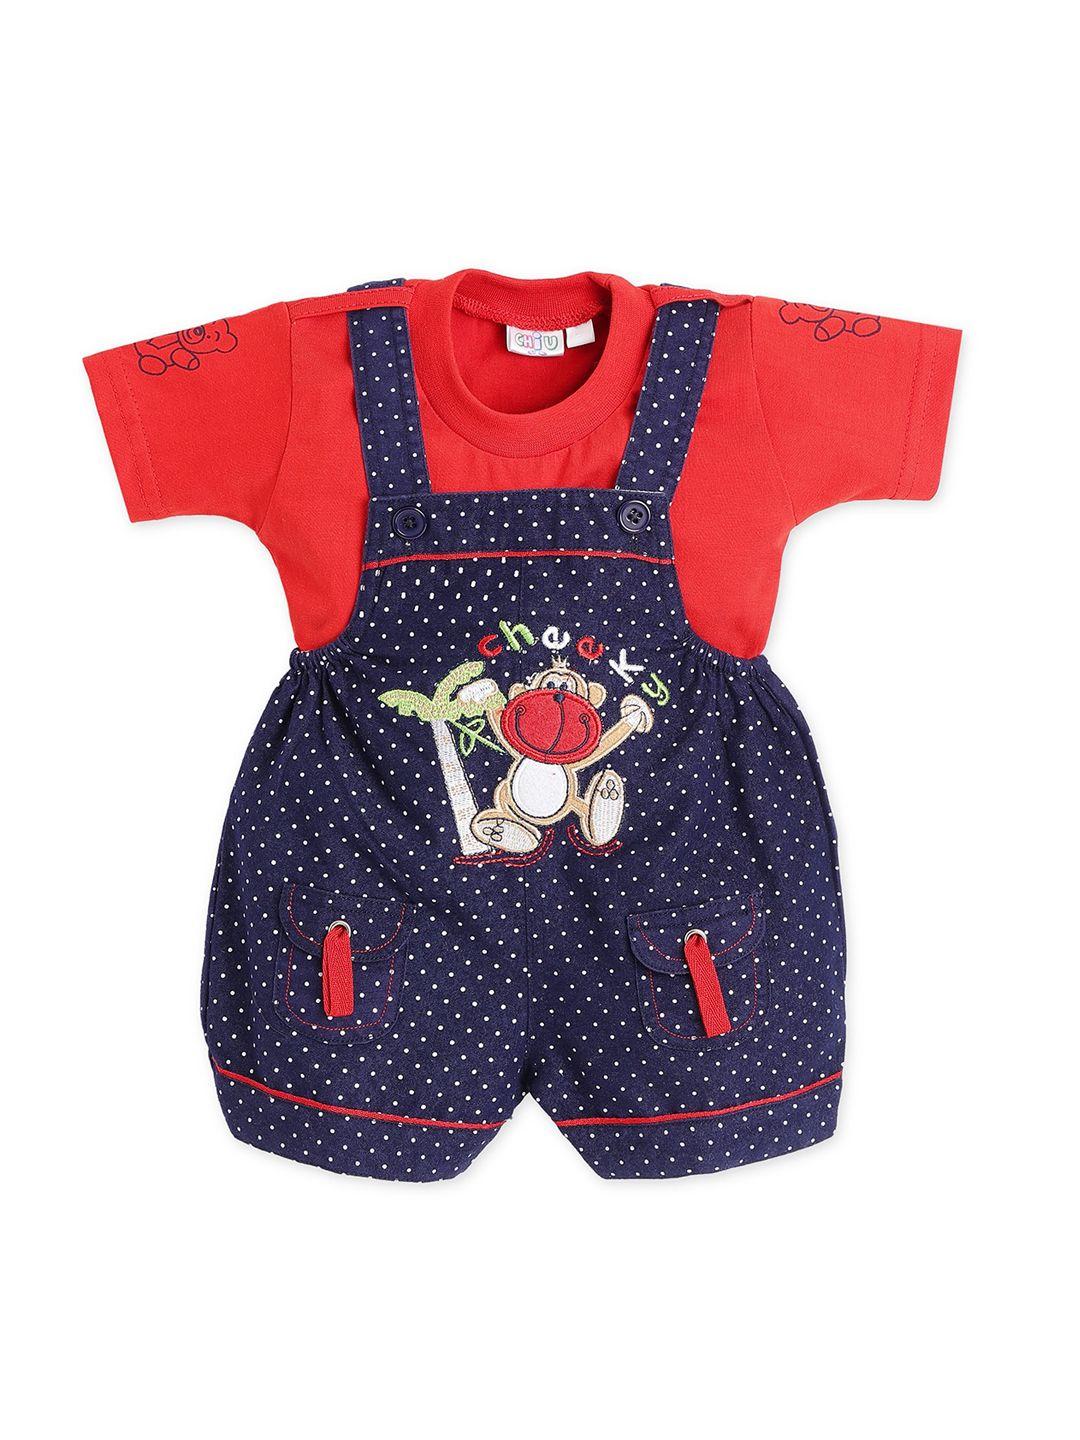 chiu unisex infant red and blue printed dungarees and t-shirt